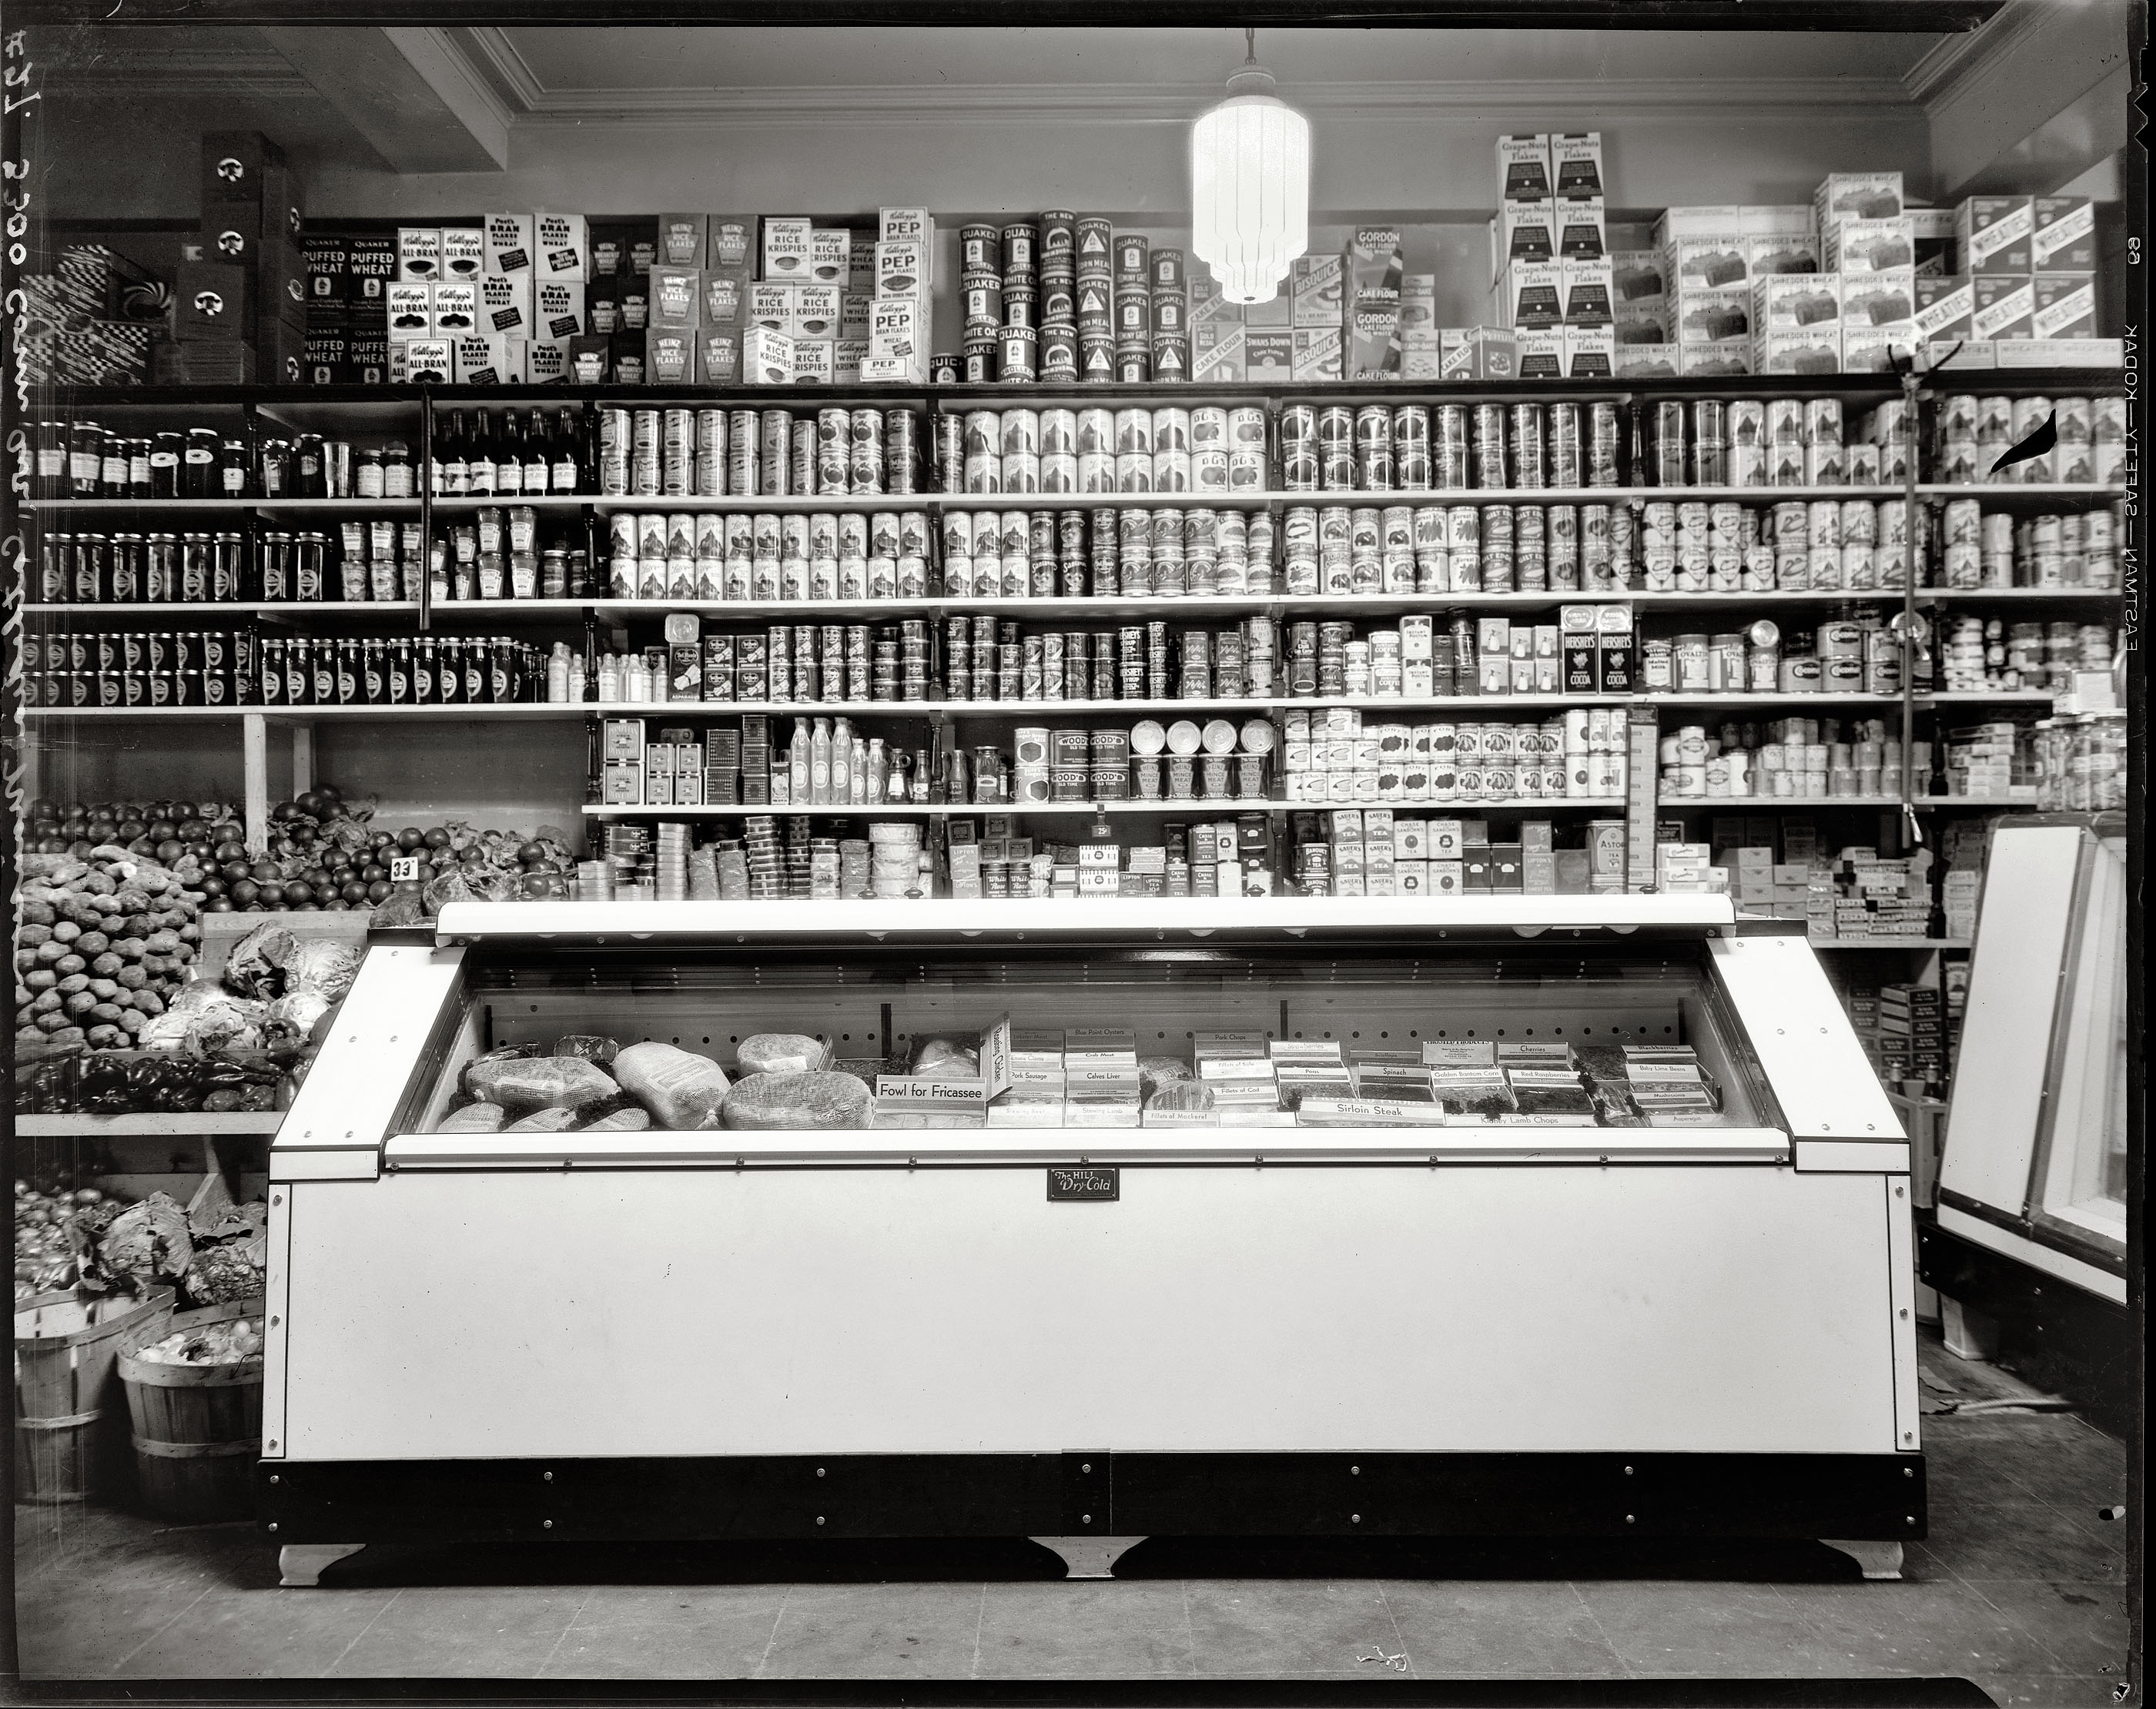 Washington, D.C., circa 1935. "Interior of D.G.S. Store, 3300 Connecticut Avenue, Cathedral Mansions." An interesting look at some Birdseye Packing Co. "Frosted Foods." View full size. 8x10 safety negative, National Photo Co. Note that by 1935, National Photo has made the jump from glass to film as a recording medium. Resulting in a more modern, contrastier look but a little less detail.